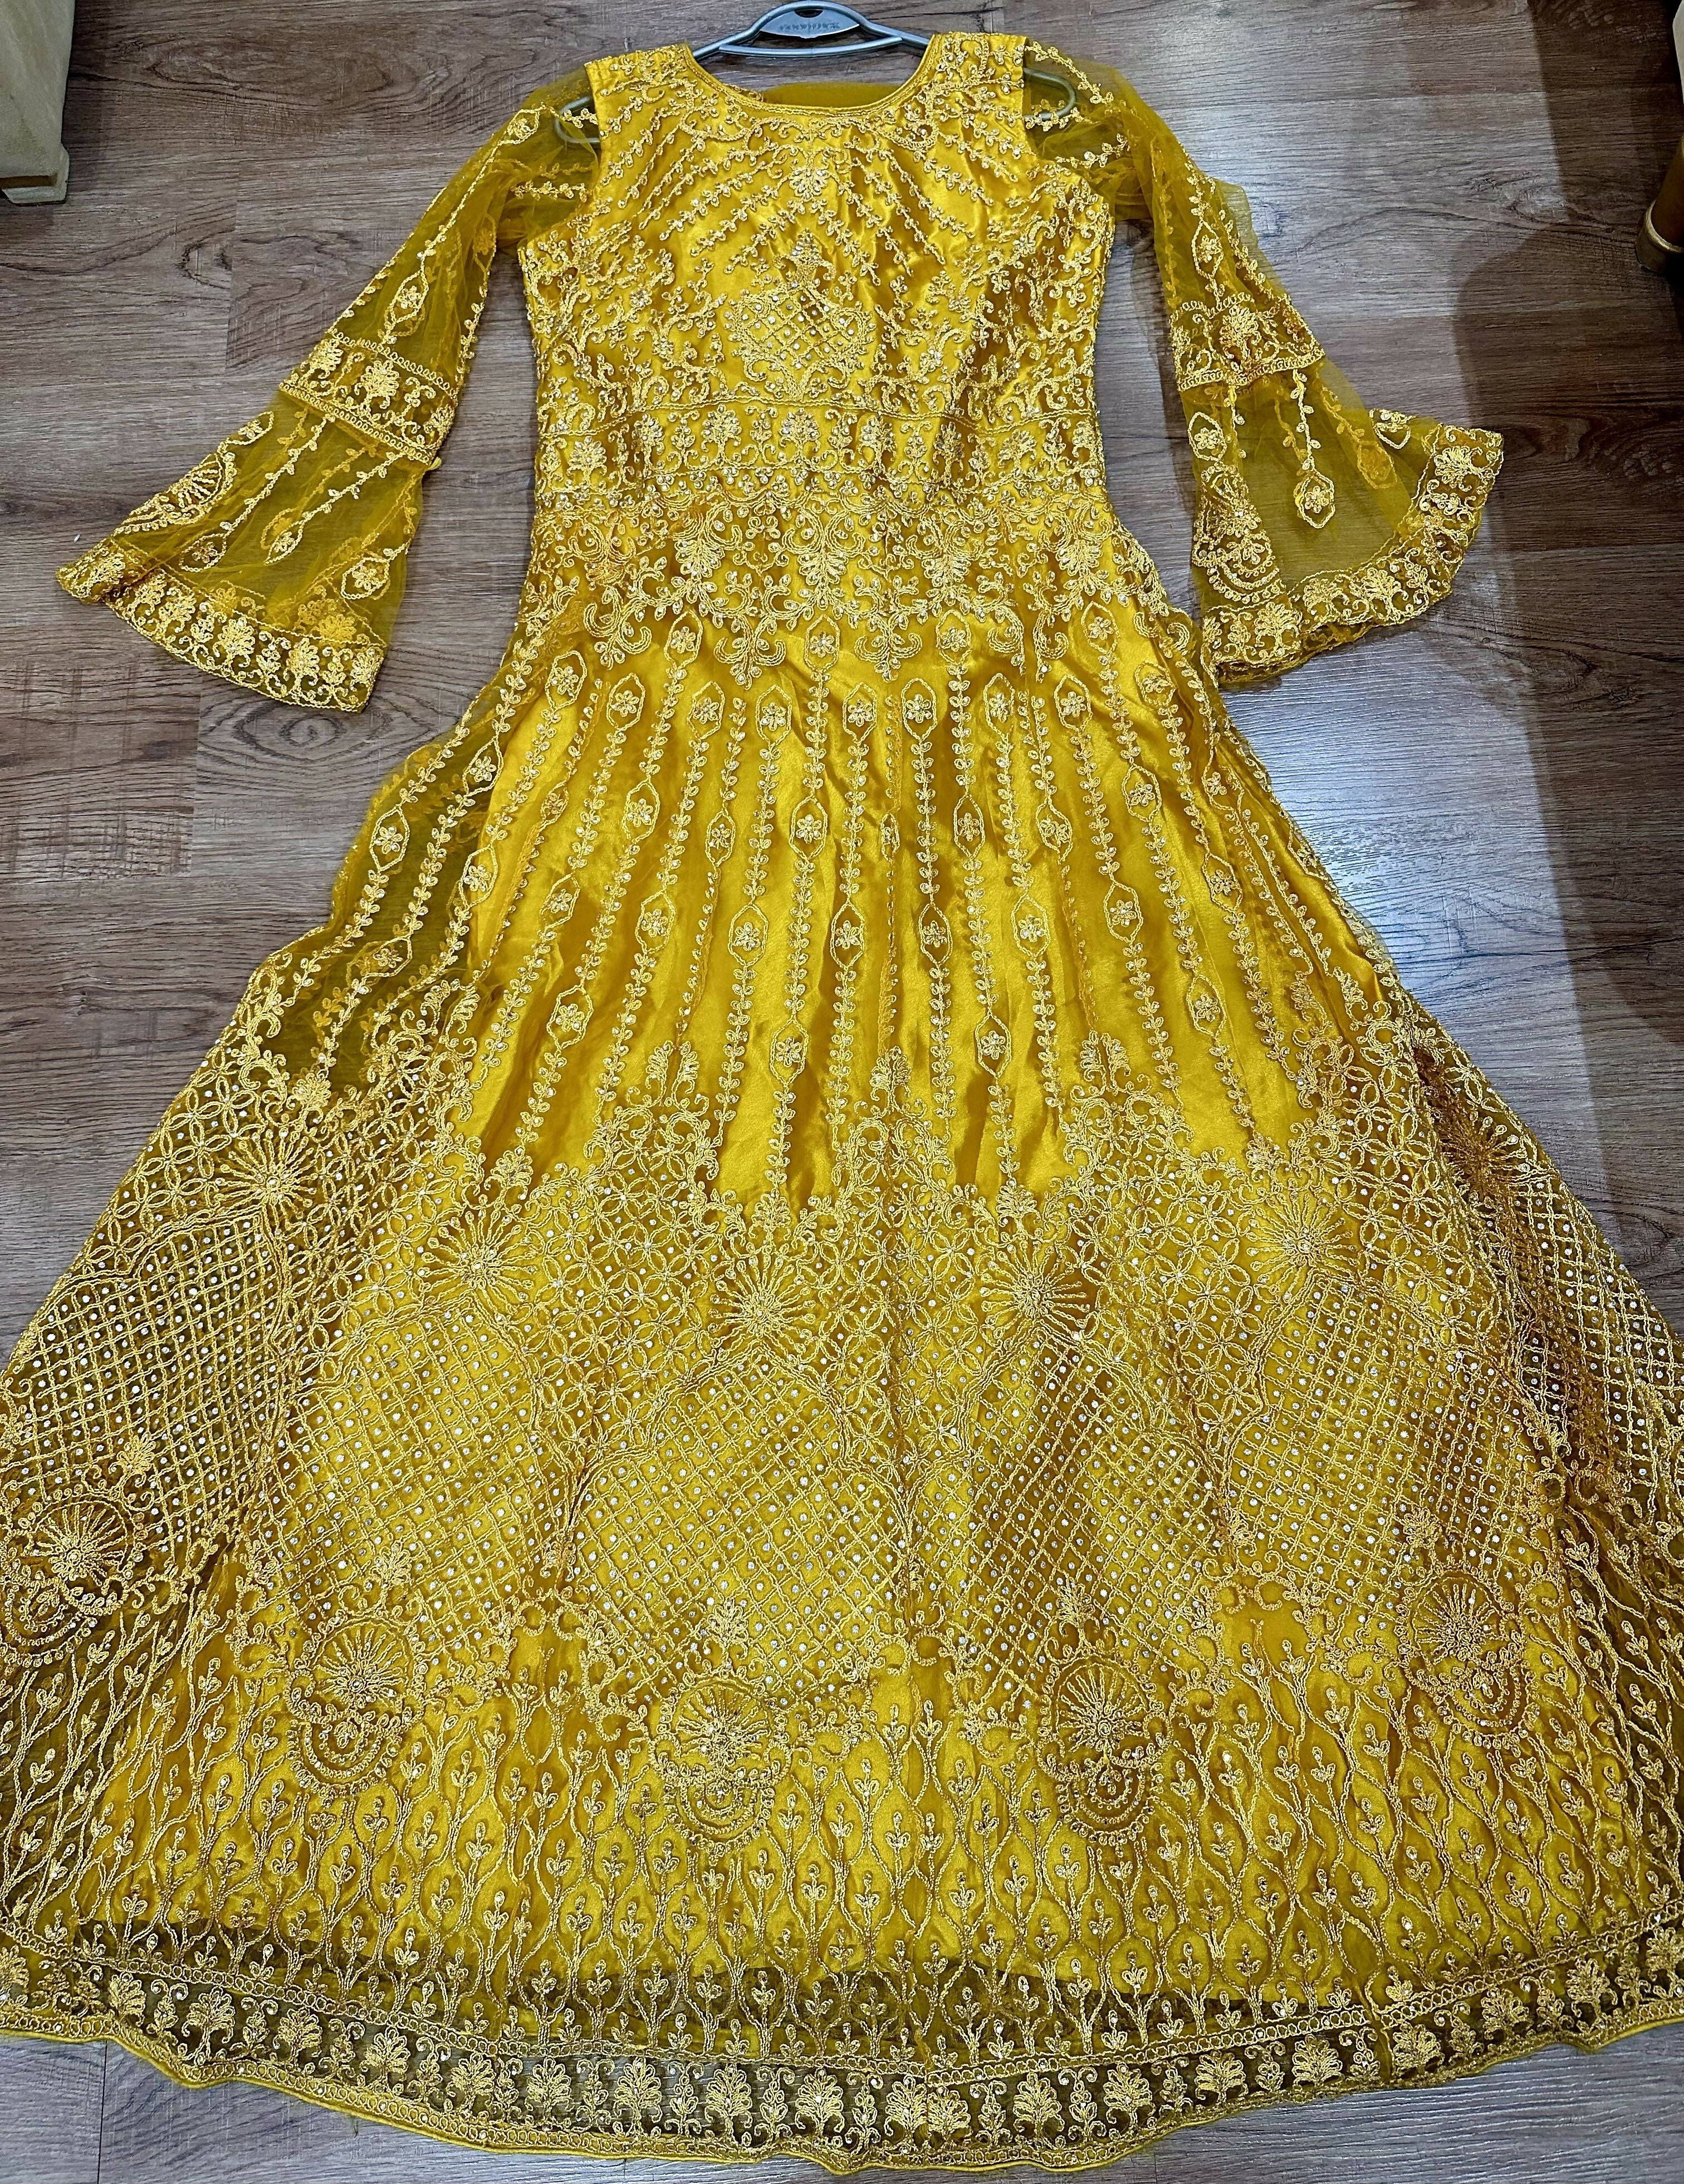 Mayoon/Mehndi bridal dress | Indian Embroidered Yellow Maxi | Women Froks & Maxis | Small | Worn Once